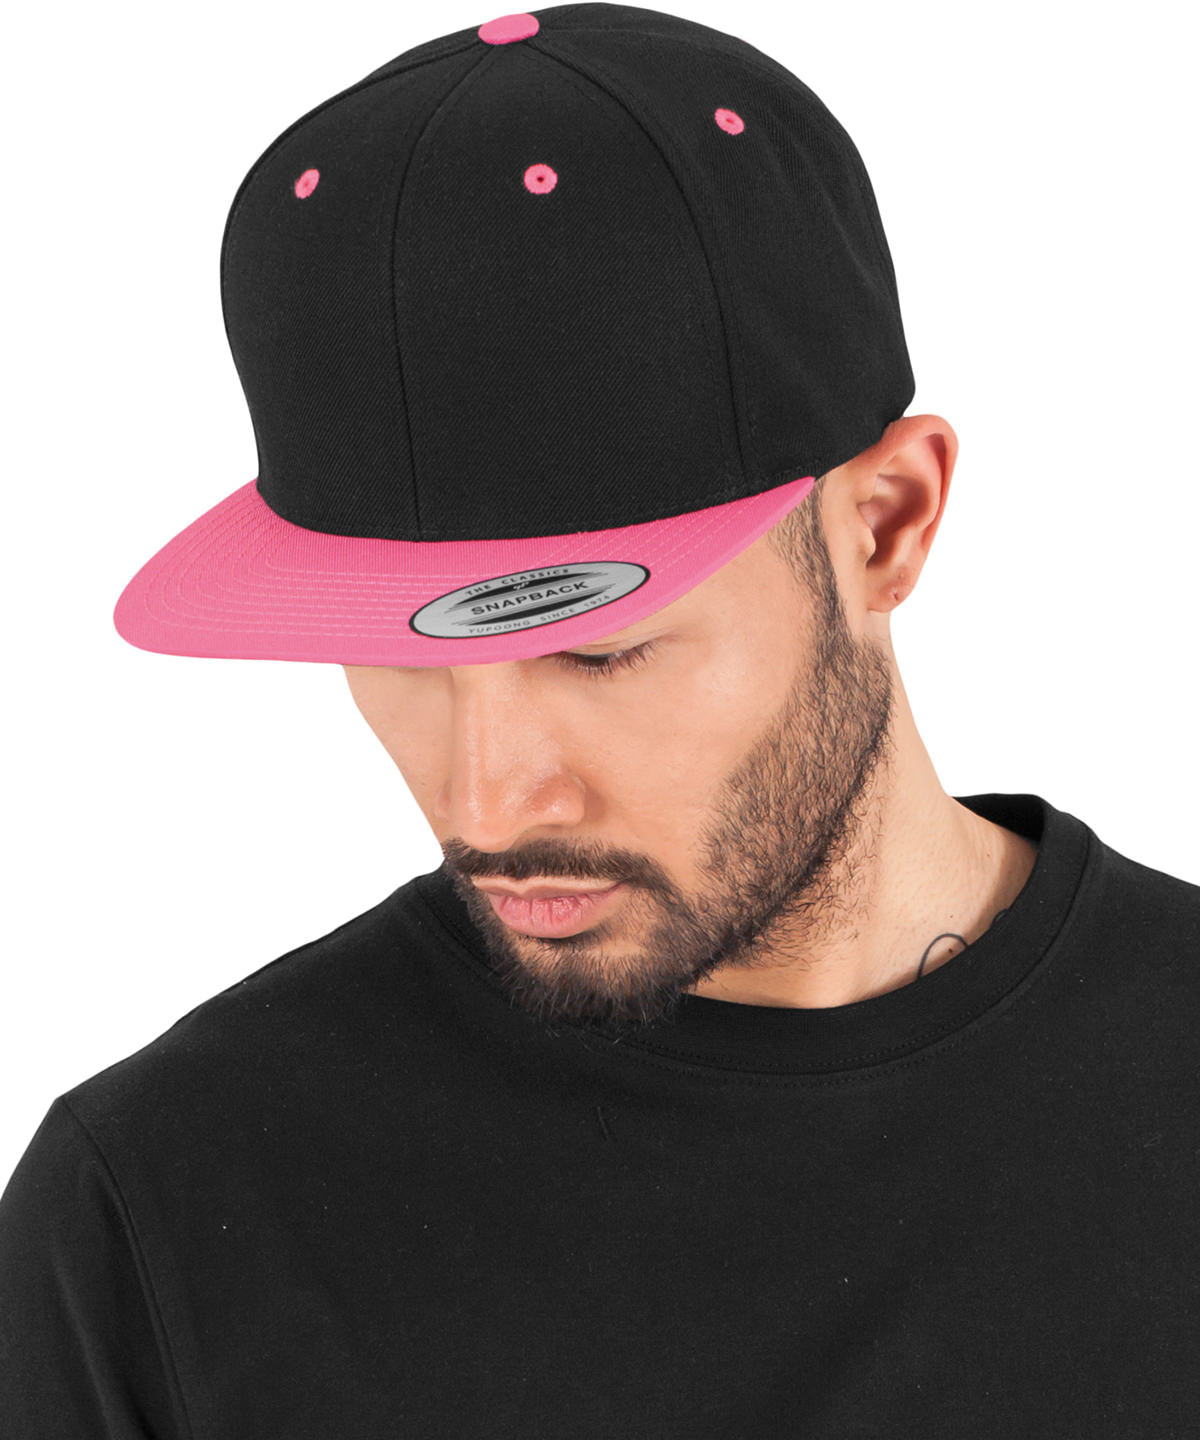 SnapBack Yupoong 2-tone ~YP002 by Art Martial Cap - classic Superstore The